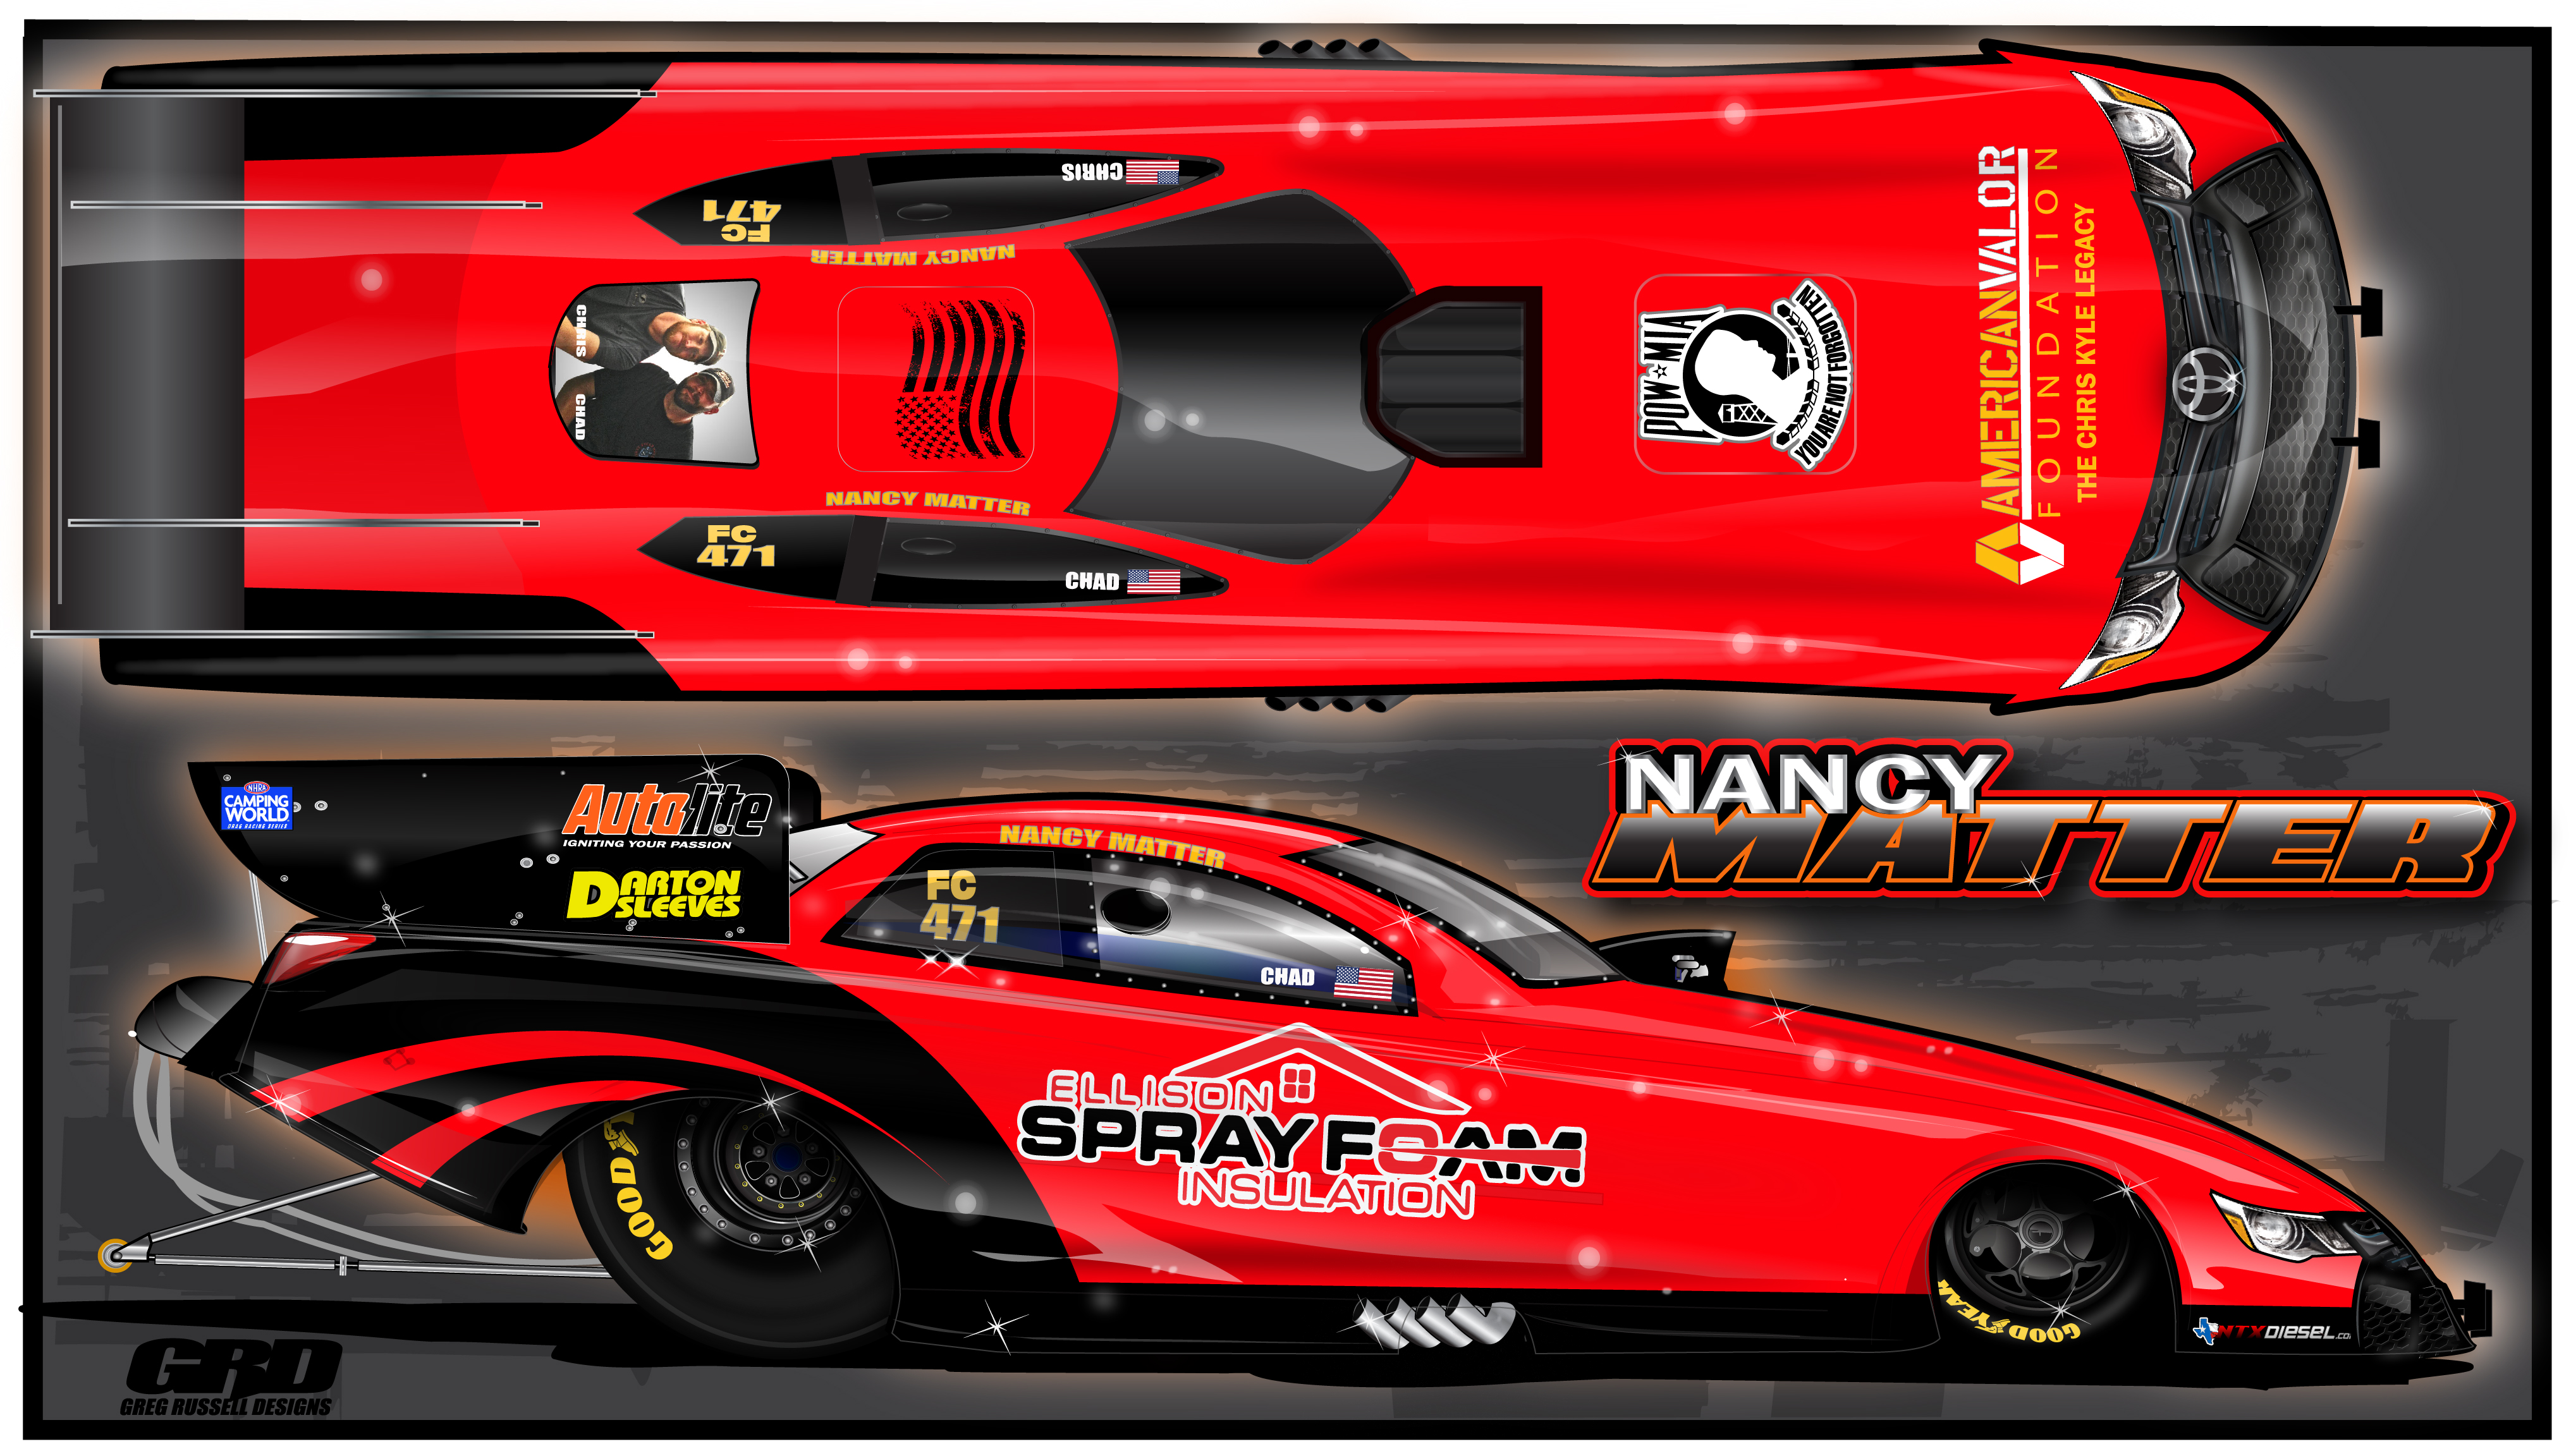 Nancy Matter Introduces Ellison Insulation to Their Newly Acquired NHRA Funny Car as an Associate Sponsor